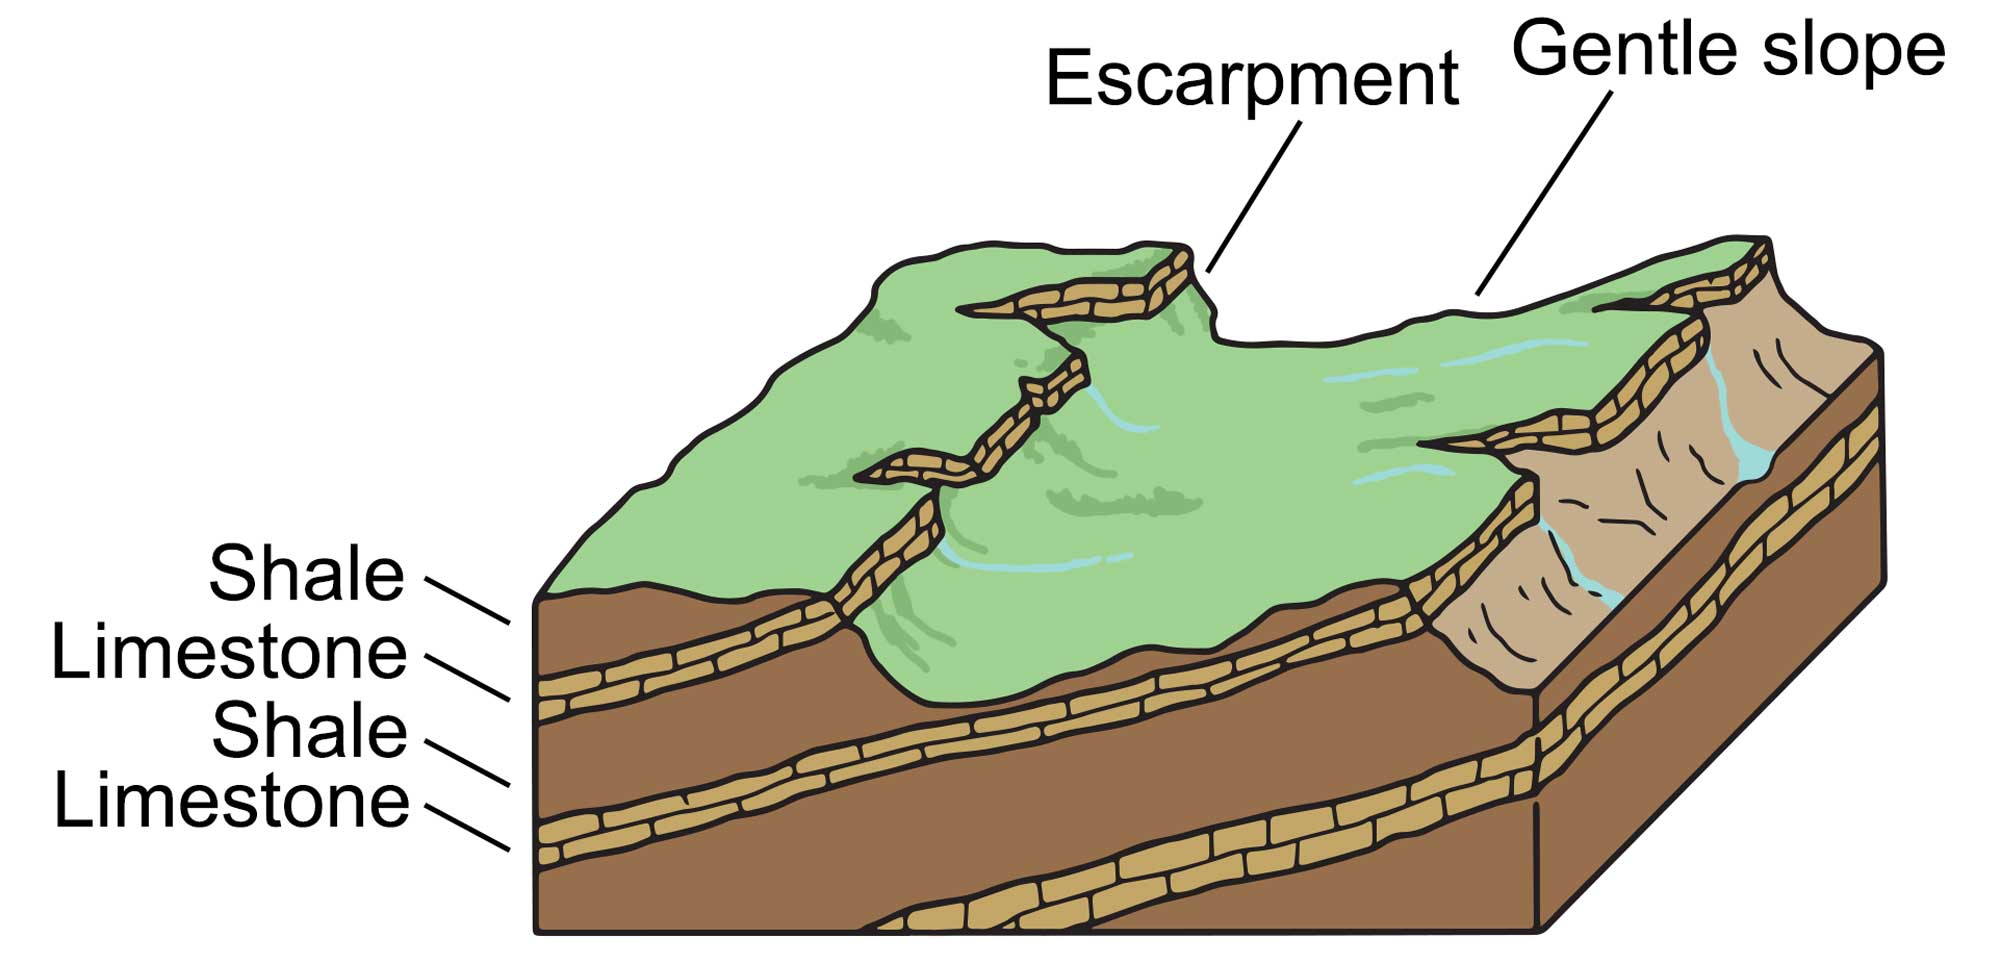 Simple illustration depicting a cross-section through a series of cuestas formed by alternating layers of dipping soft shales and hard limestones, which form escarpment ridges in the topography.